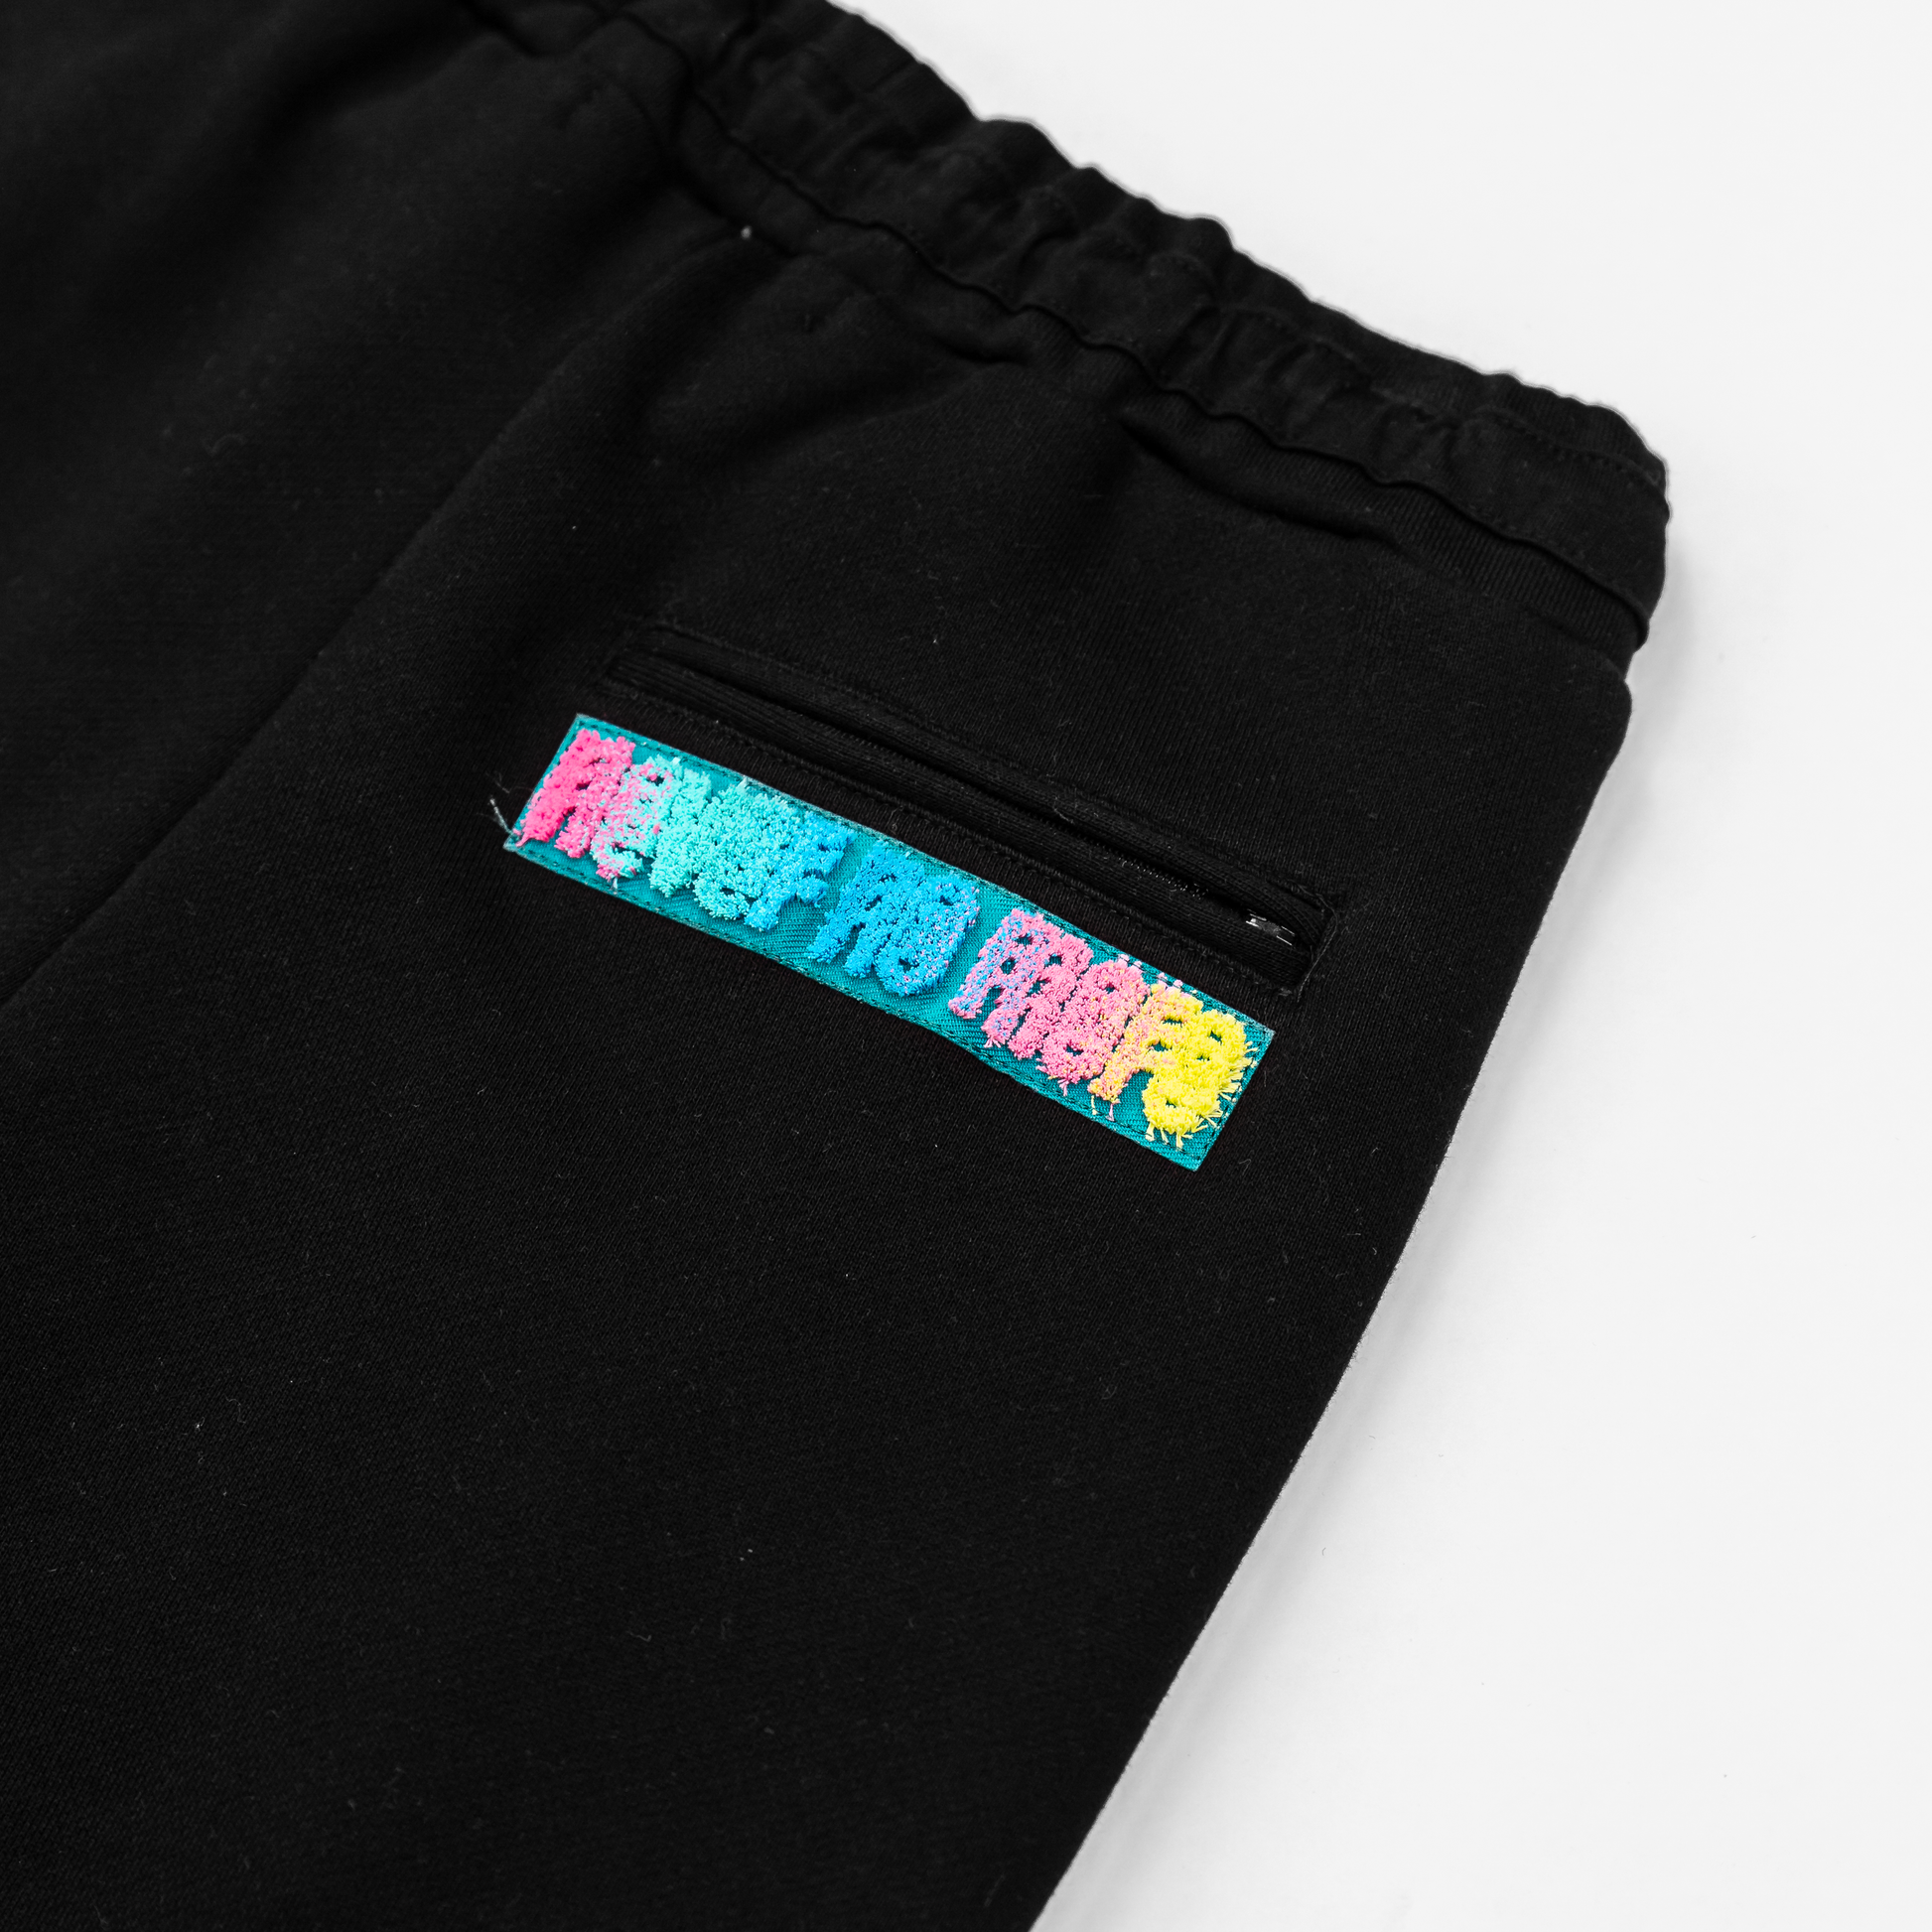 Flying Duck Utility Joggers, Black - Layr Official